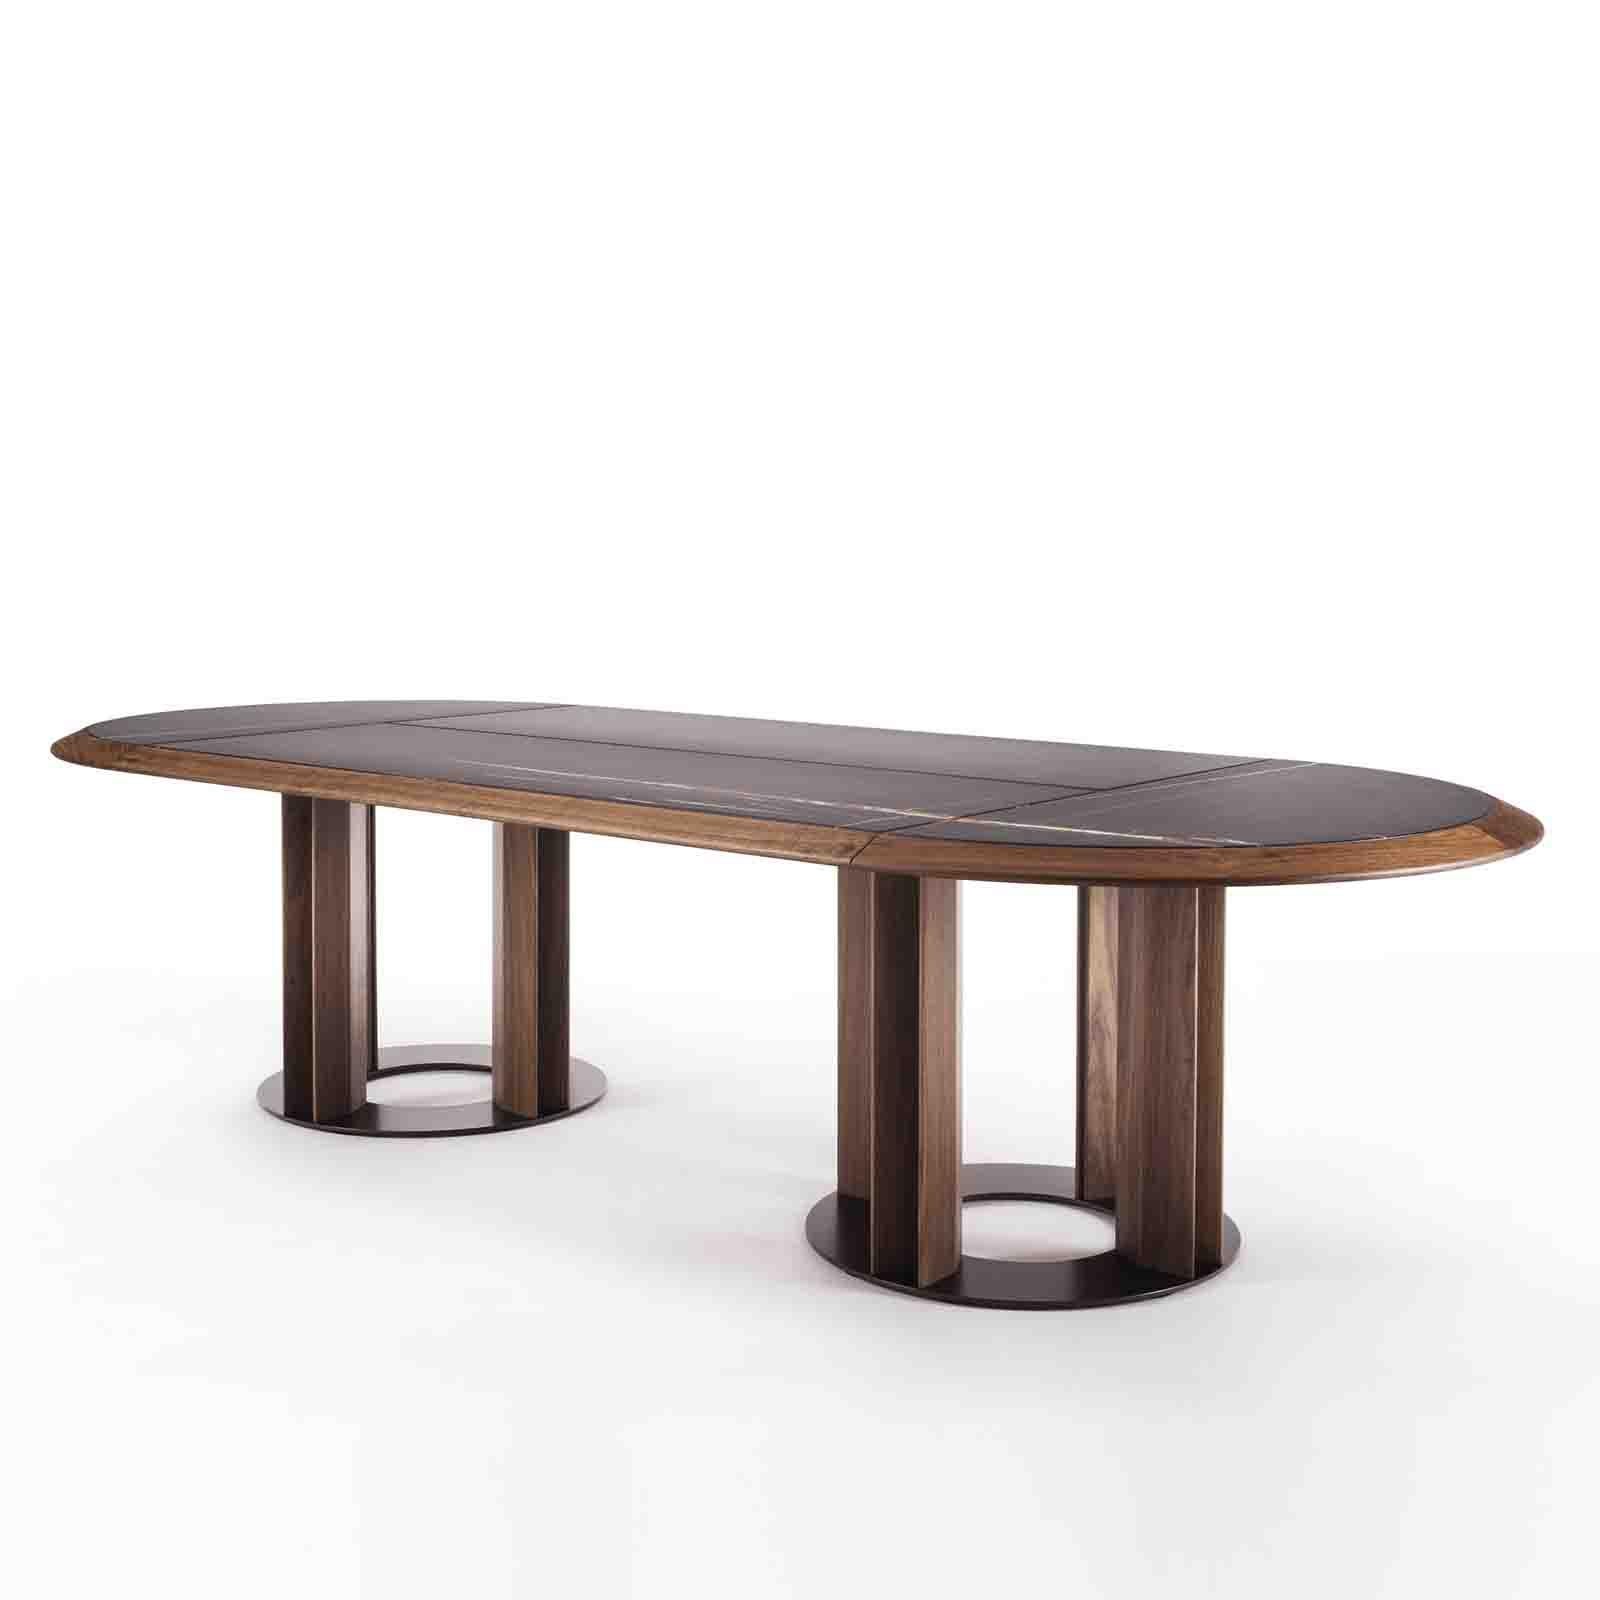 Dining table Crosby Oval Sahara Black with solid walnut 
wood base structure and top frame, with Sahara black marble 
top divided in four parts. With swivel walnut wood round tray.
Also available with solid walnut wood top or
brown emperador